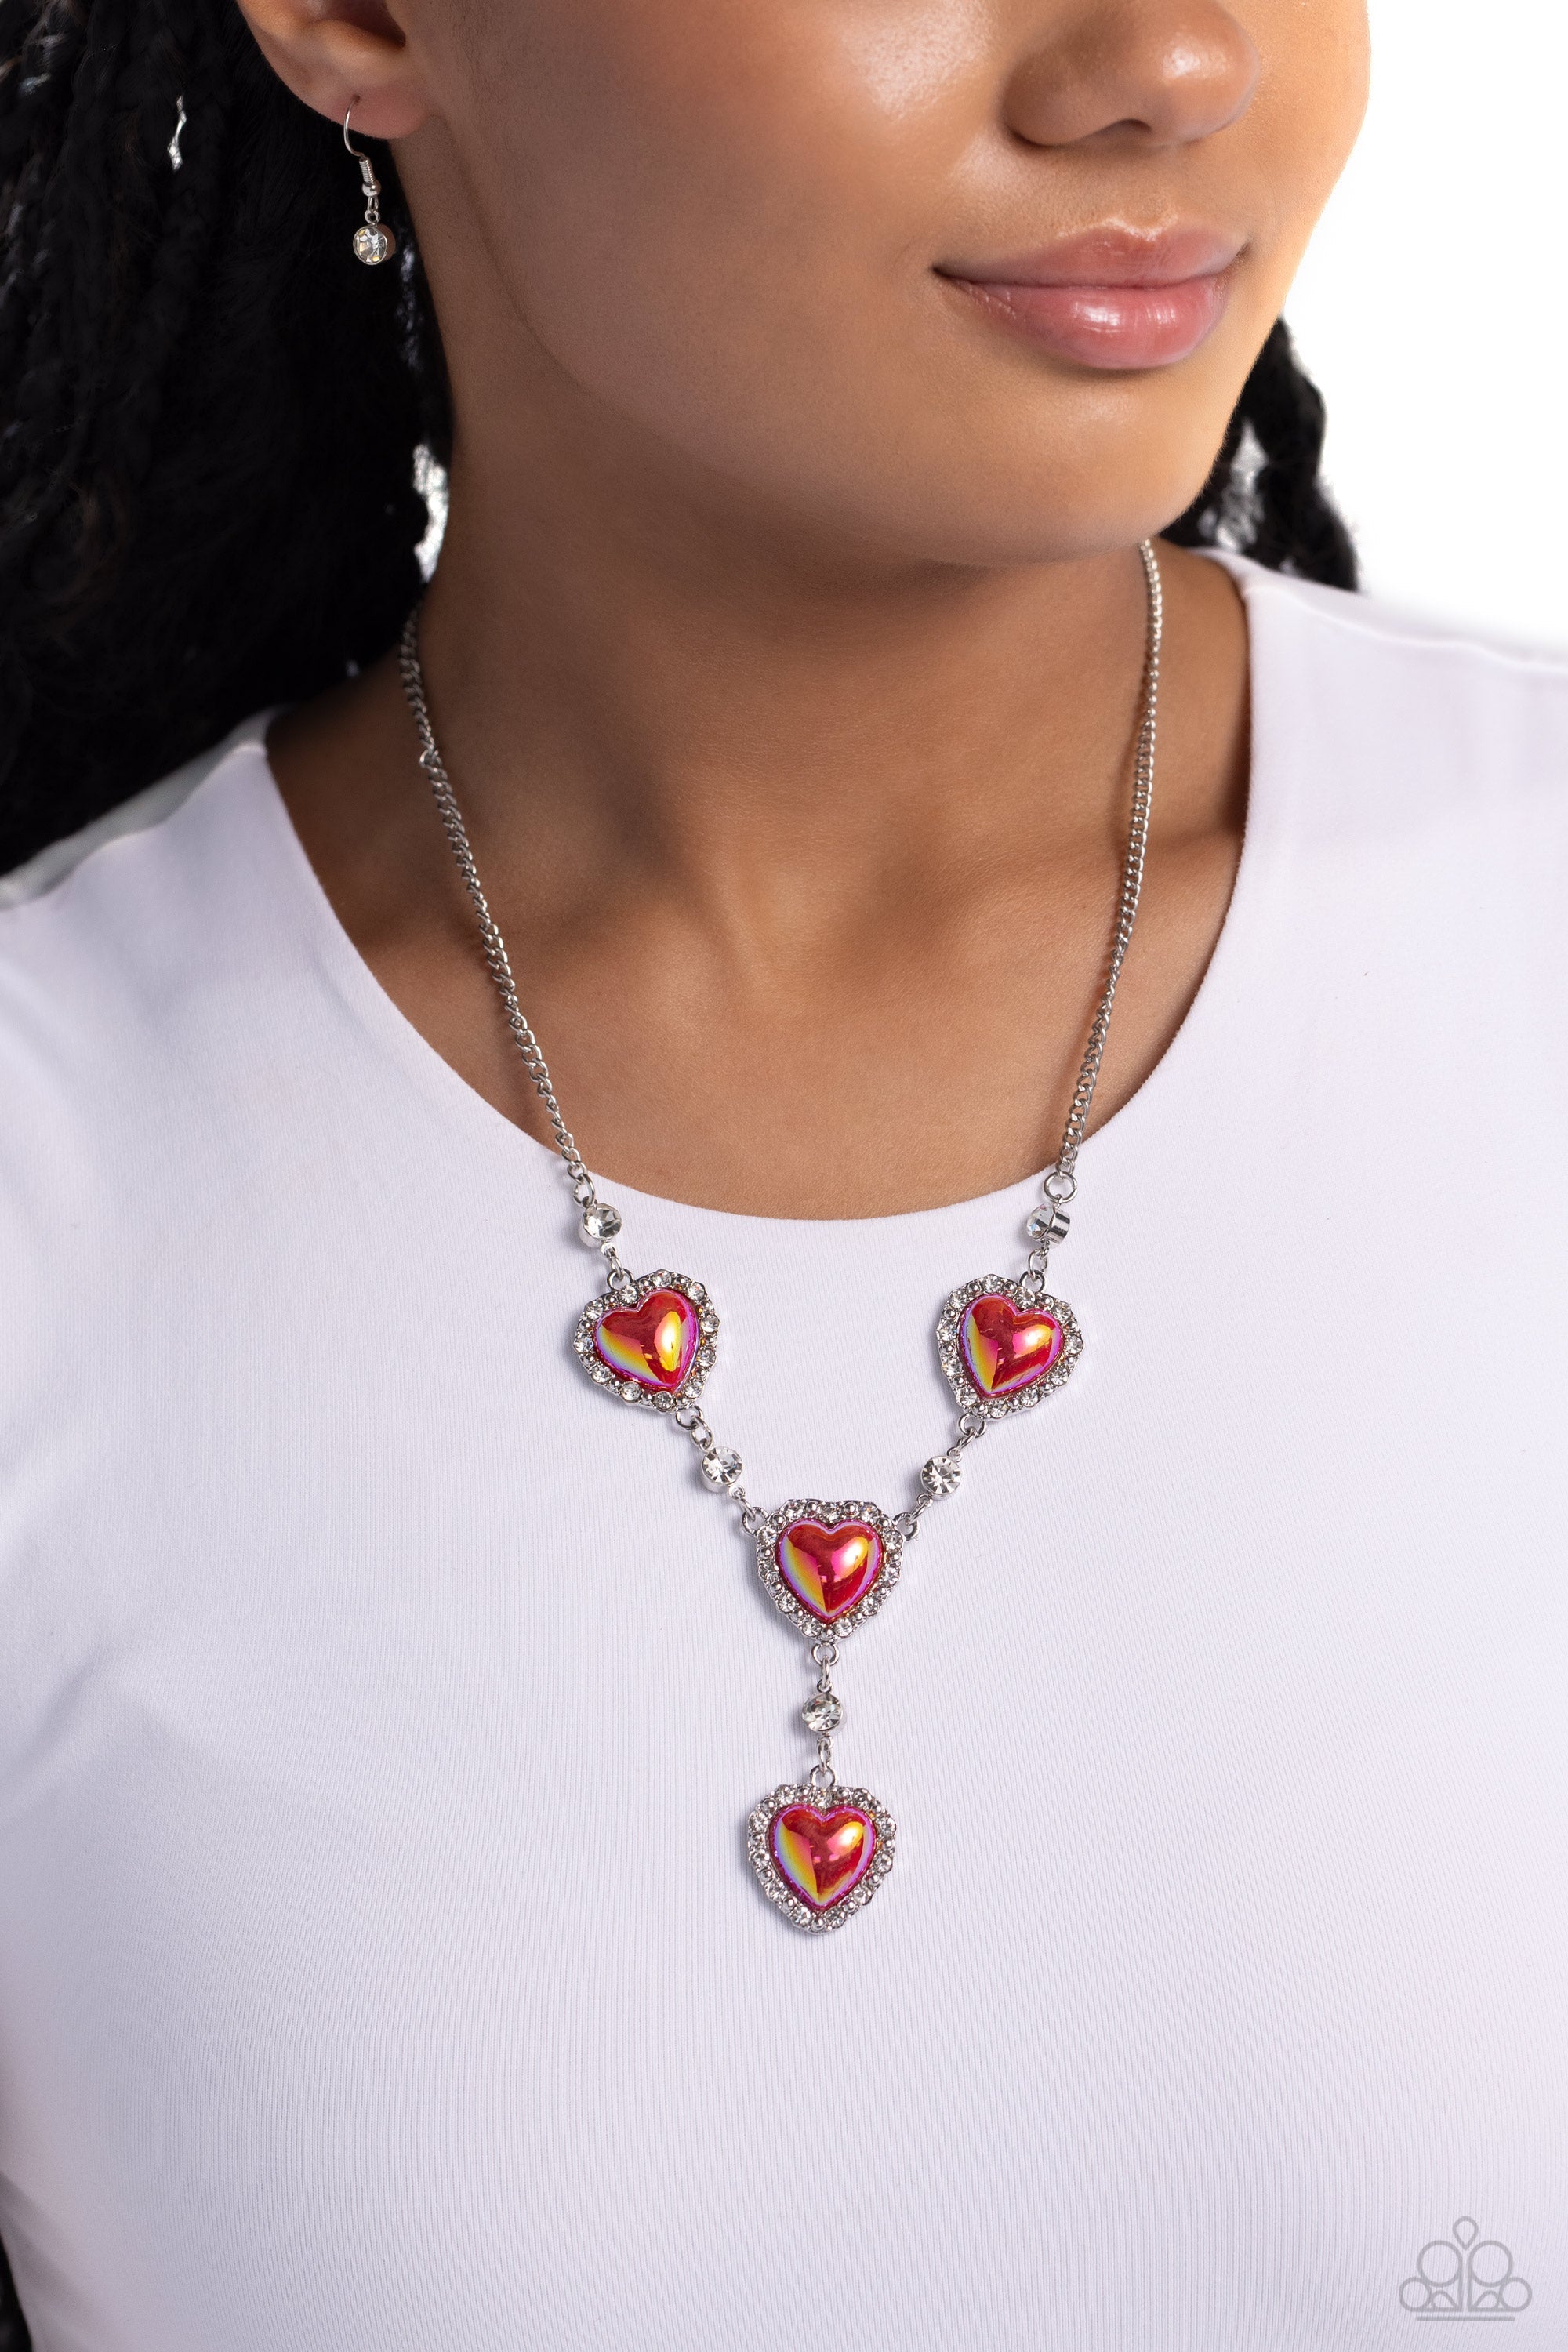 Stuck On You Red Heart Necklace - Paparazzi Accessories- lightbox - CarasShop.com - $5 Jewelry by Cara Jewels